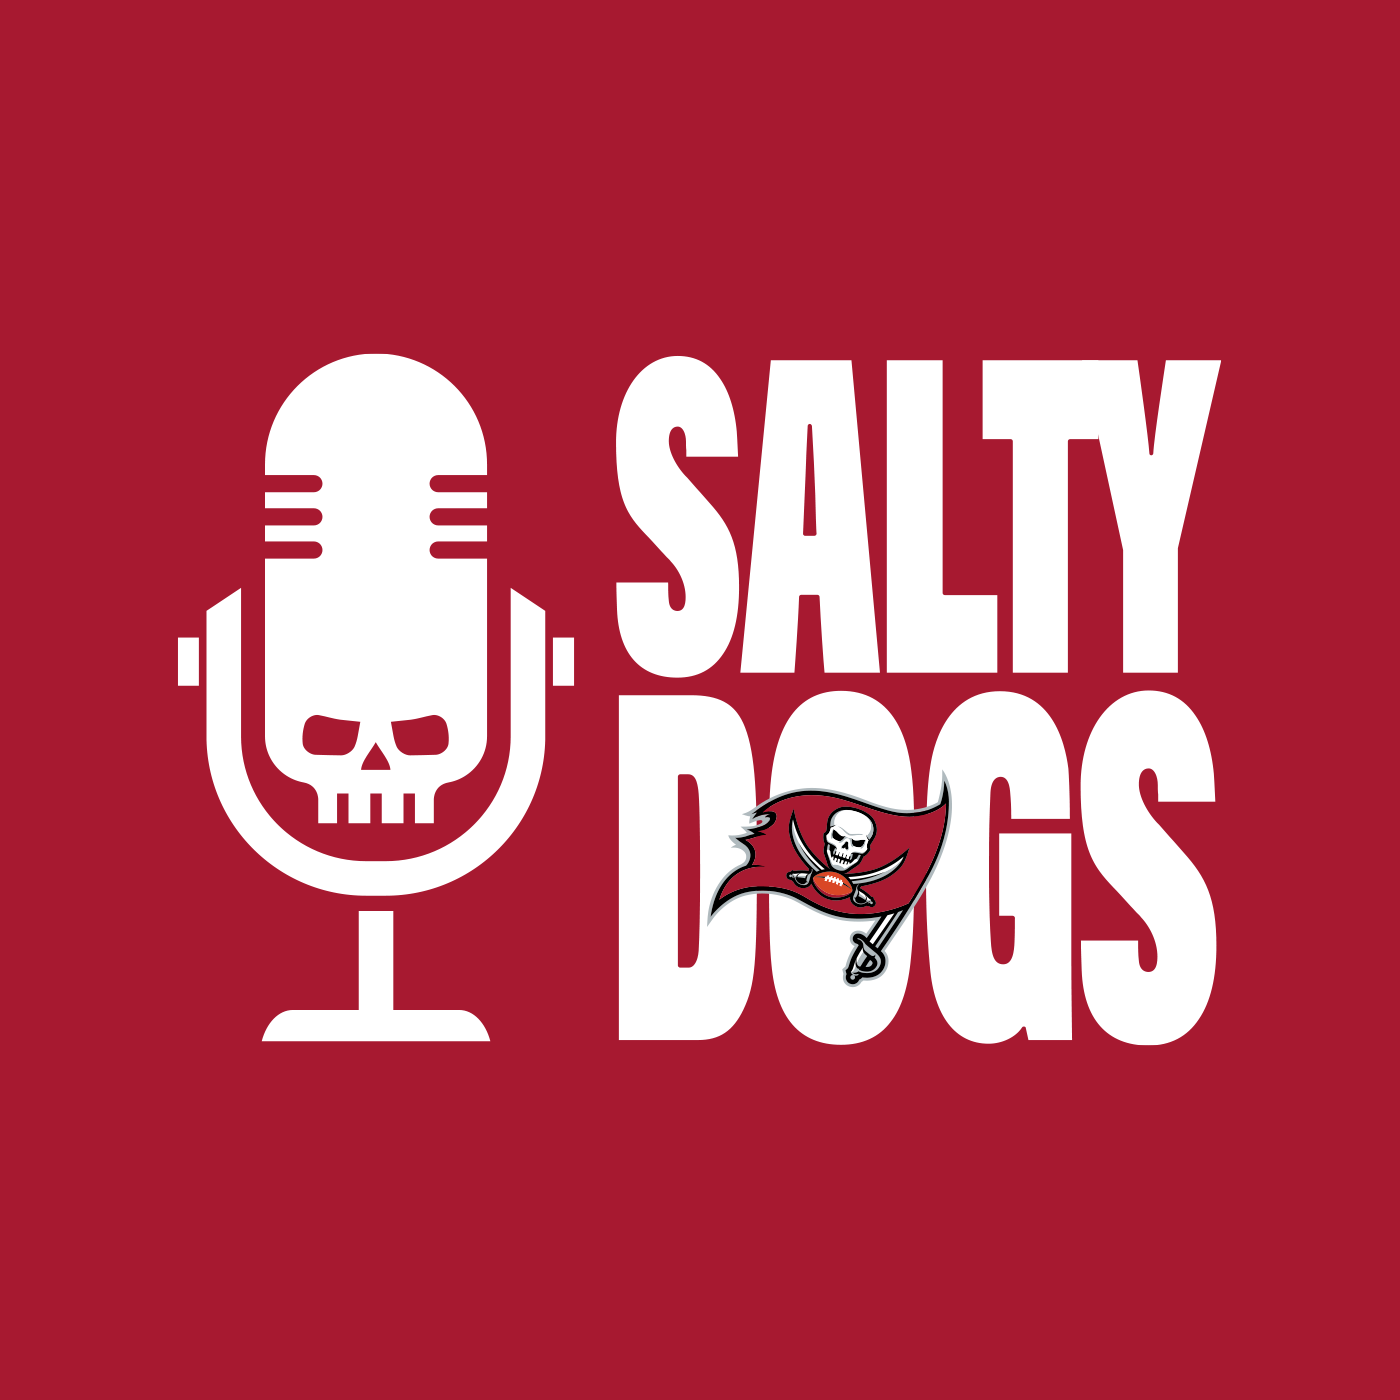 Life, Death & Mike Evans in the Endzone | Salty Dogs